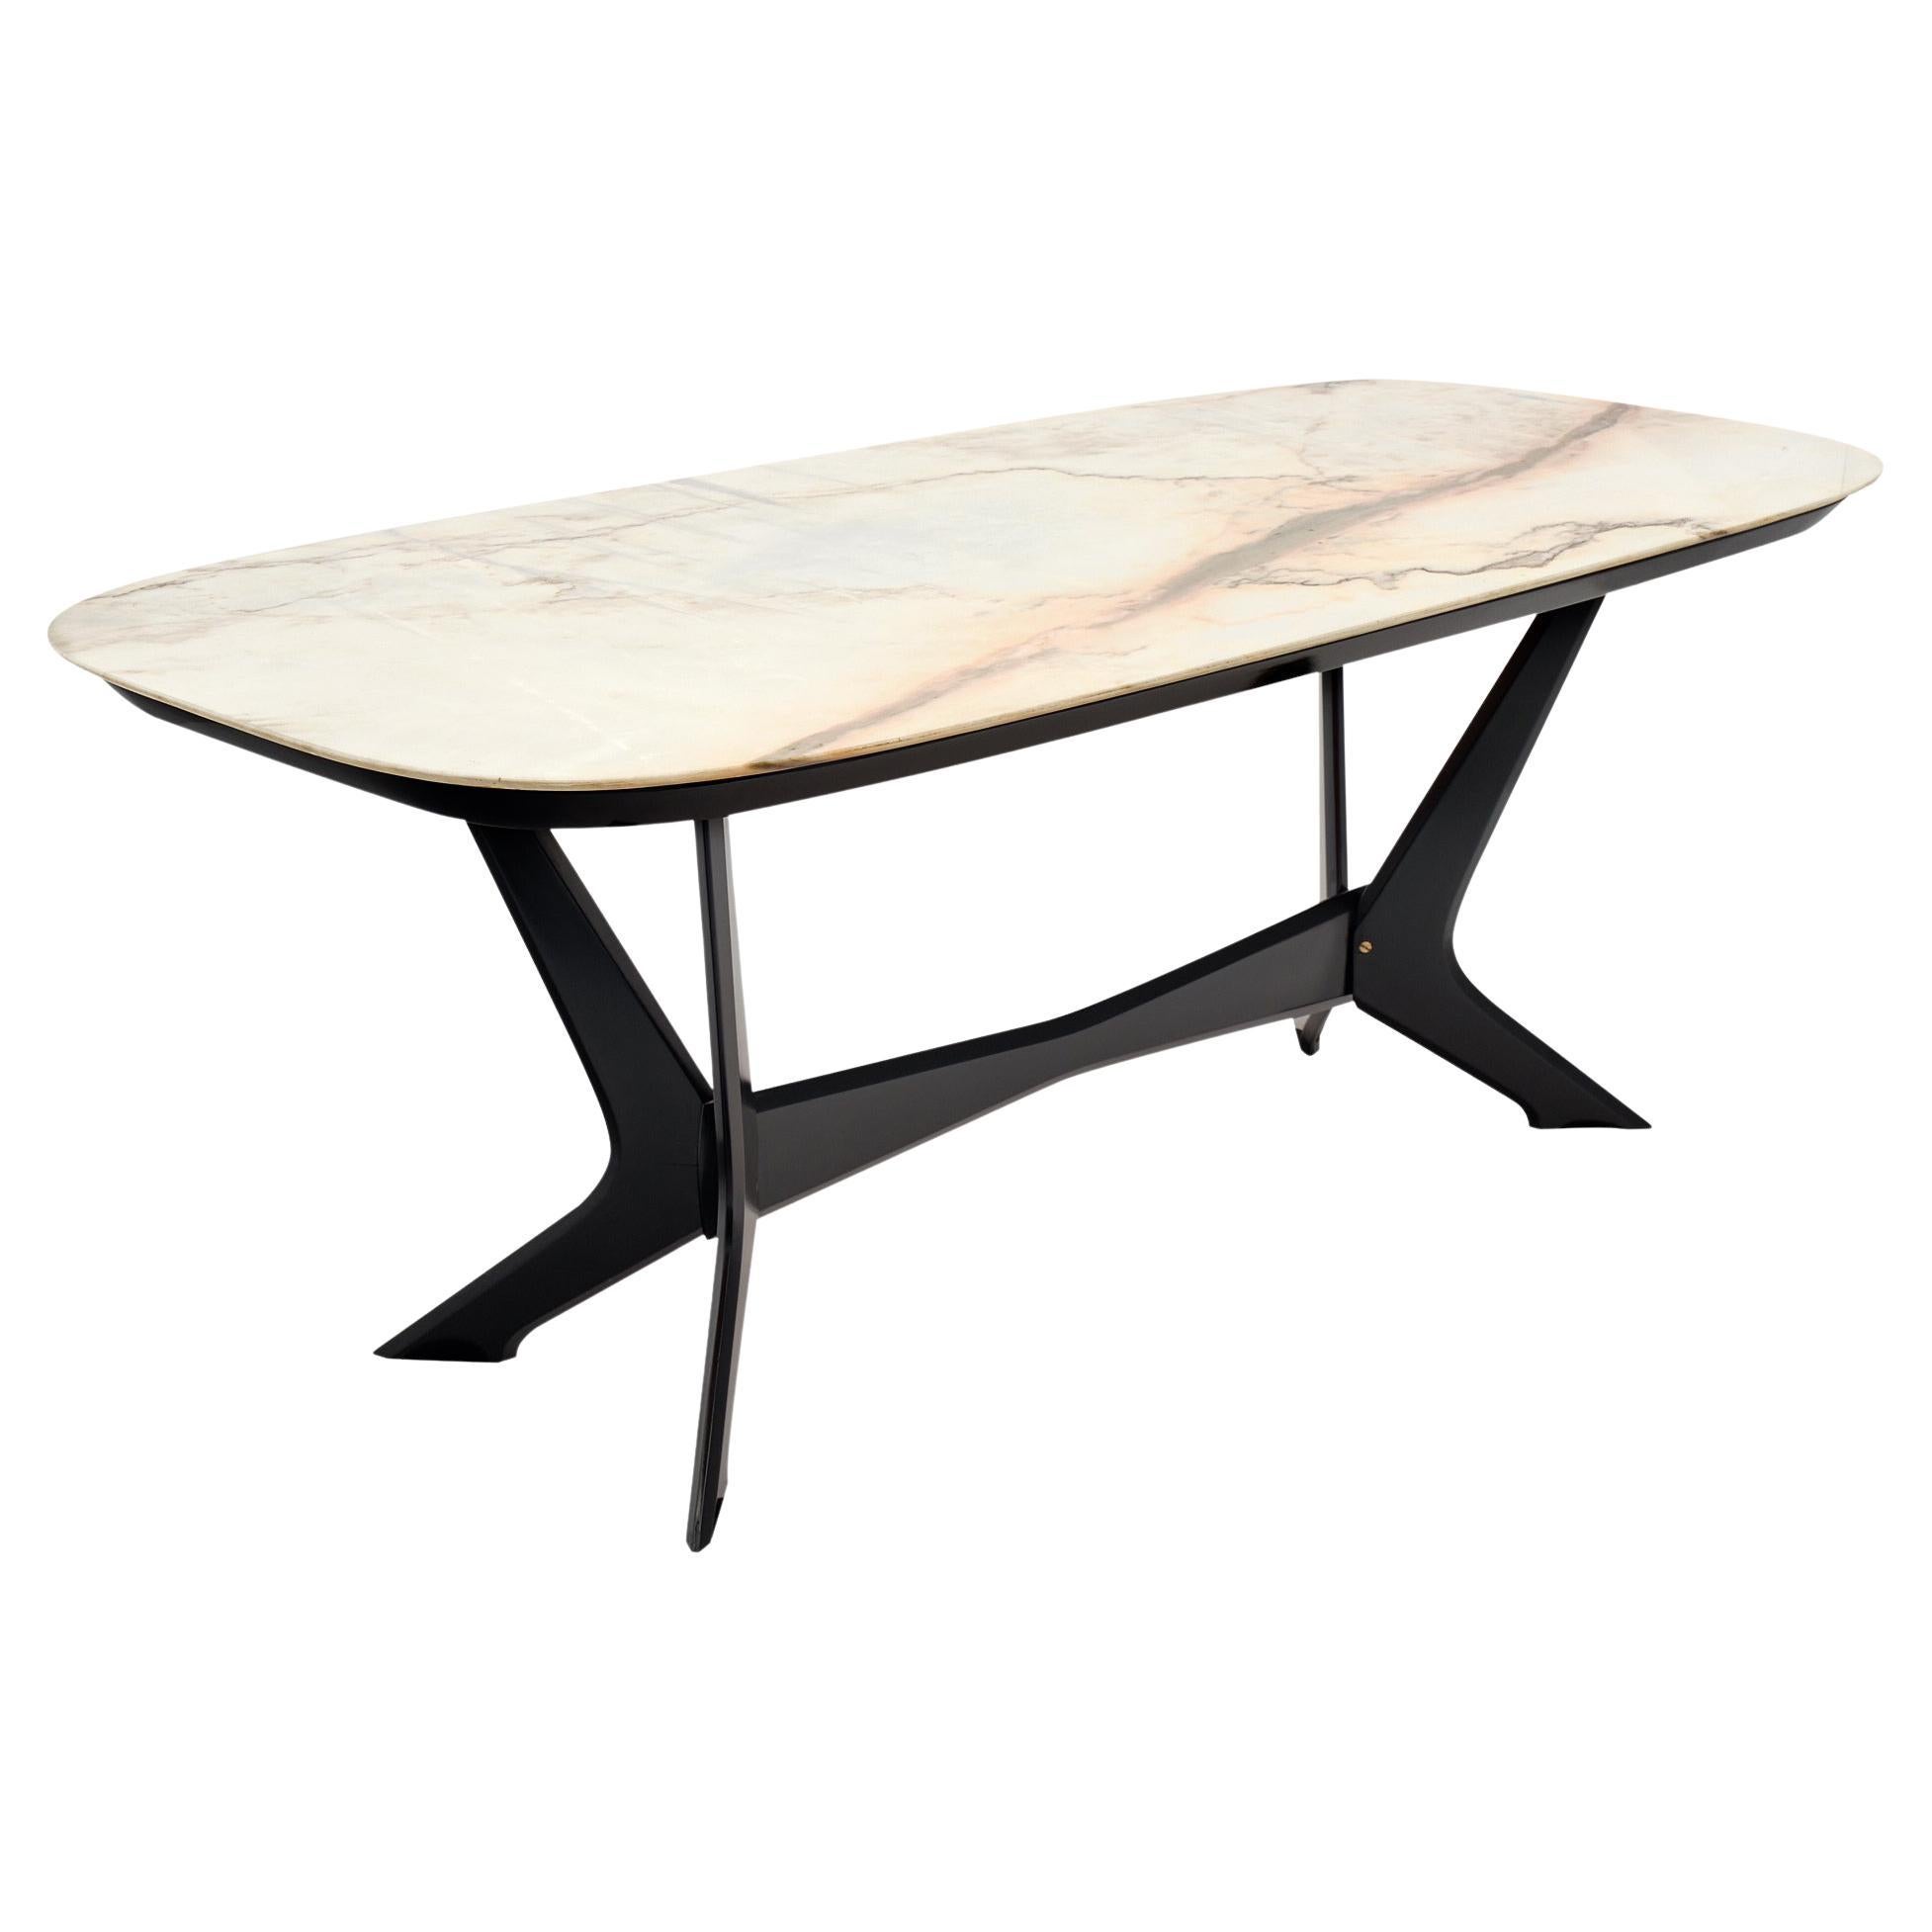 Italian Modernist Dining Table Attributed to Ico Parisi For Sale